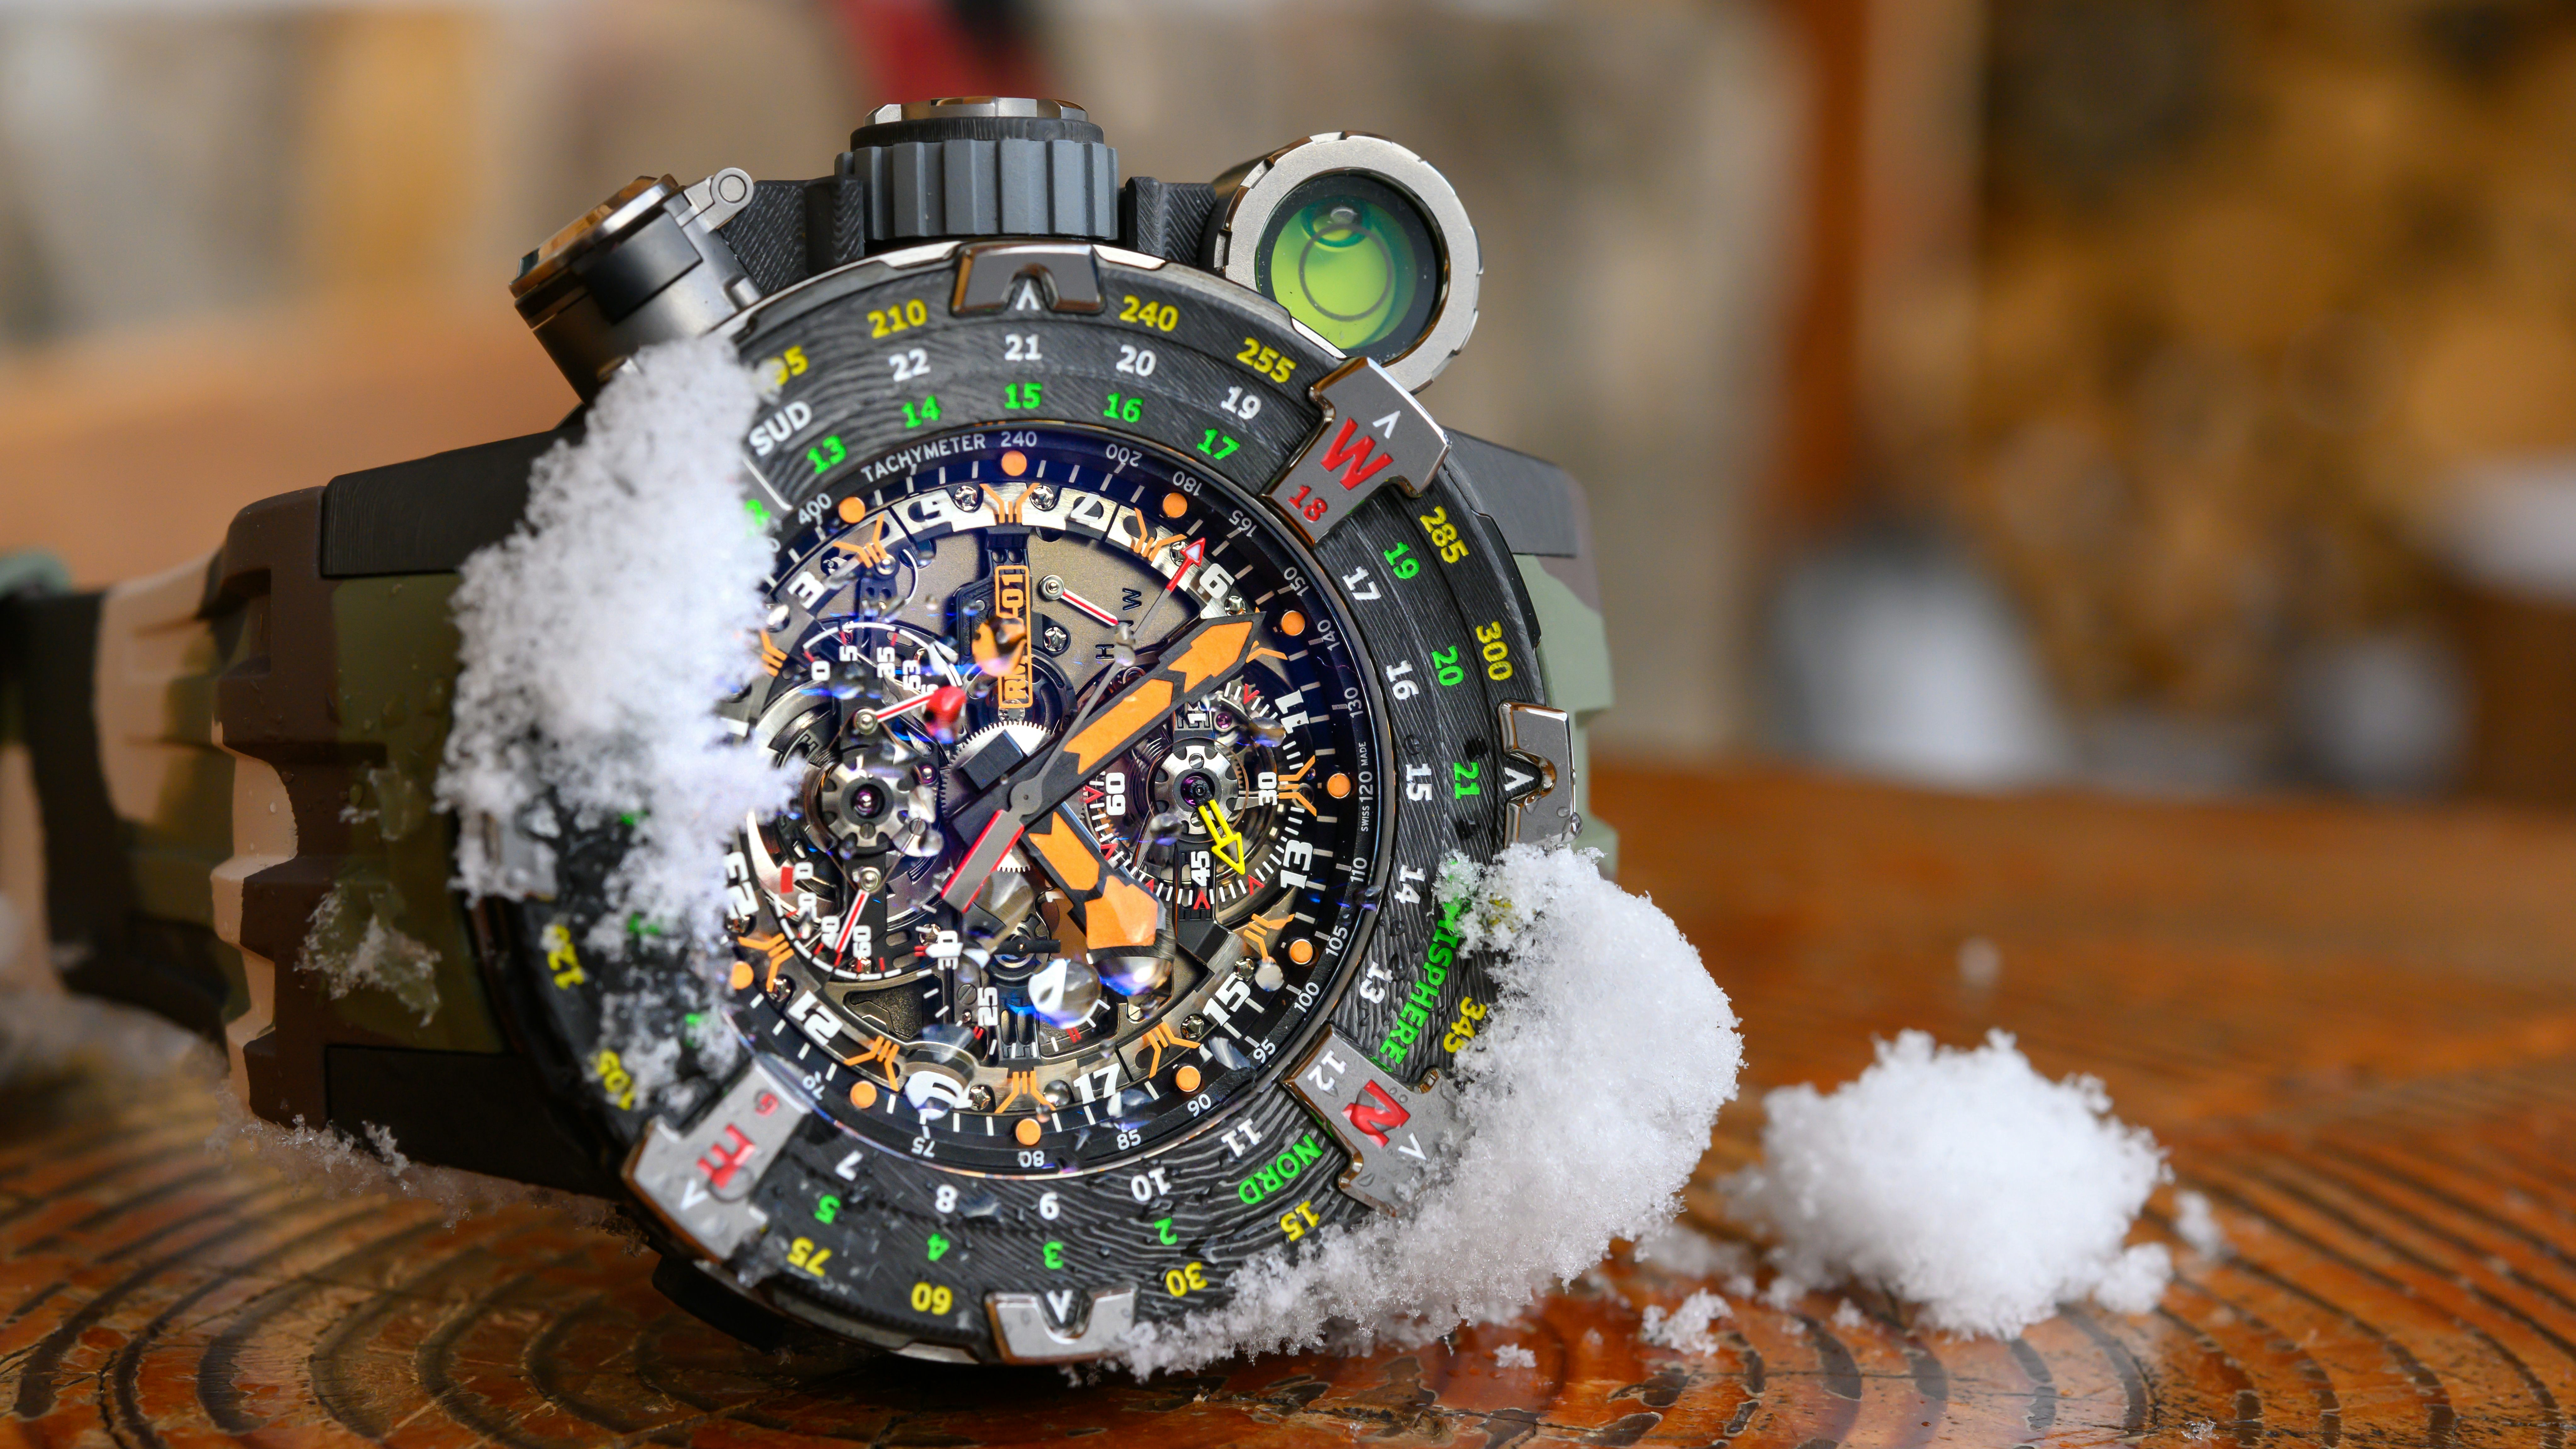 In-Depth: Taking The Richard Mille RM25-01 Into The Colorado